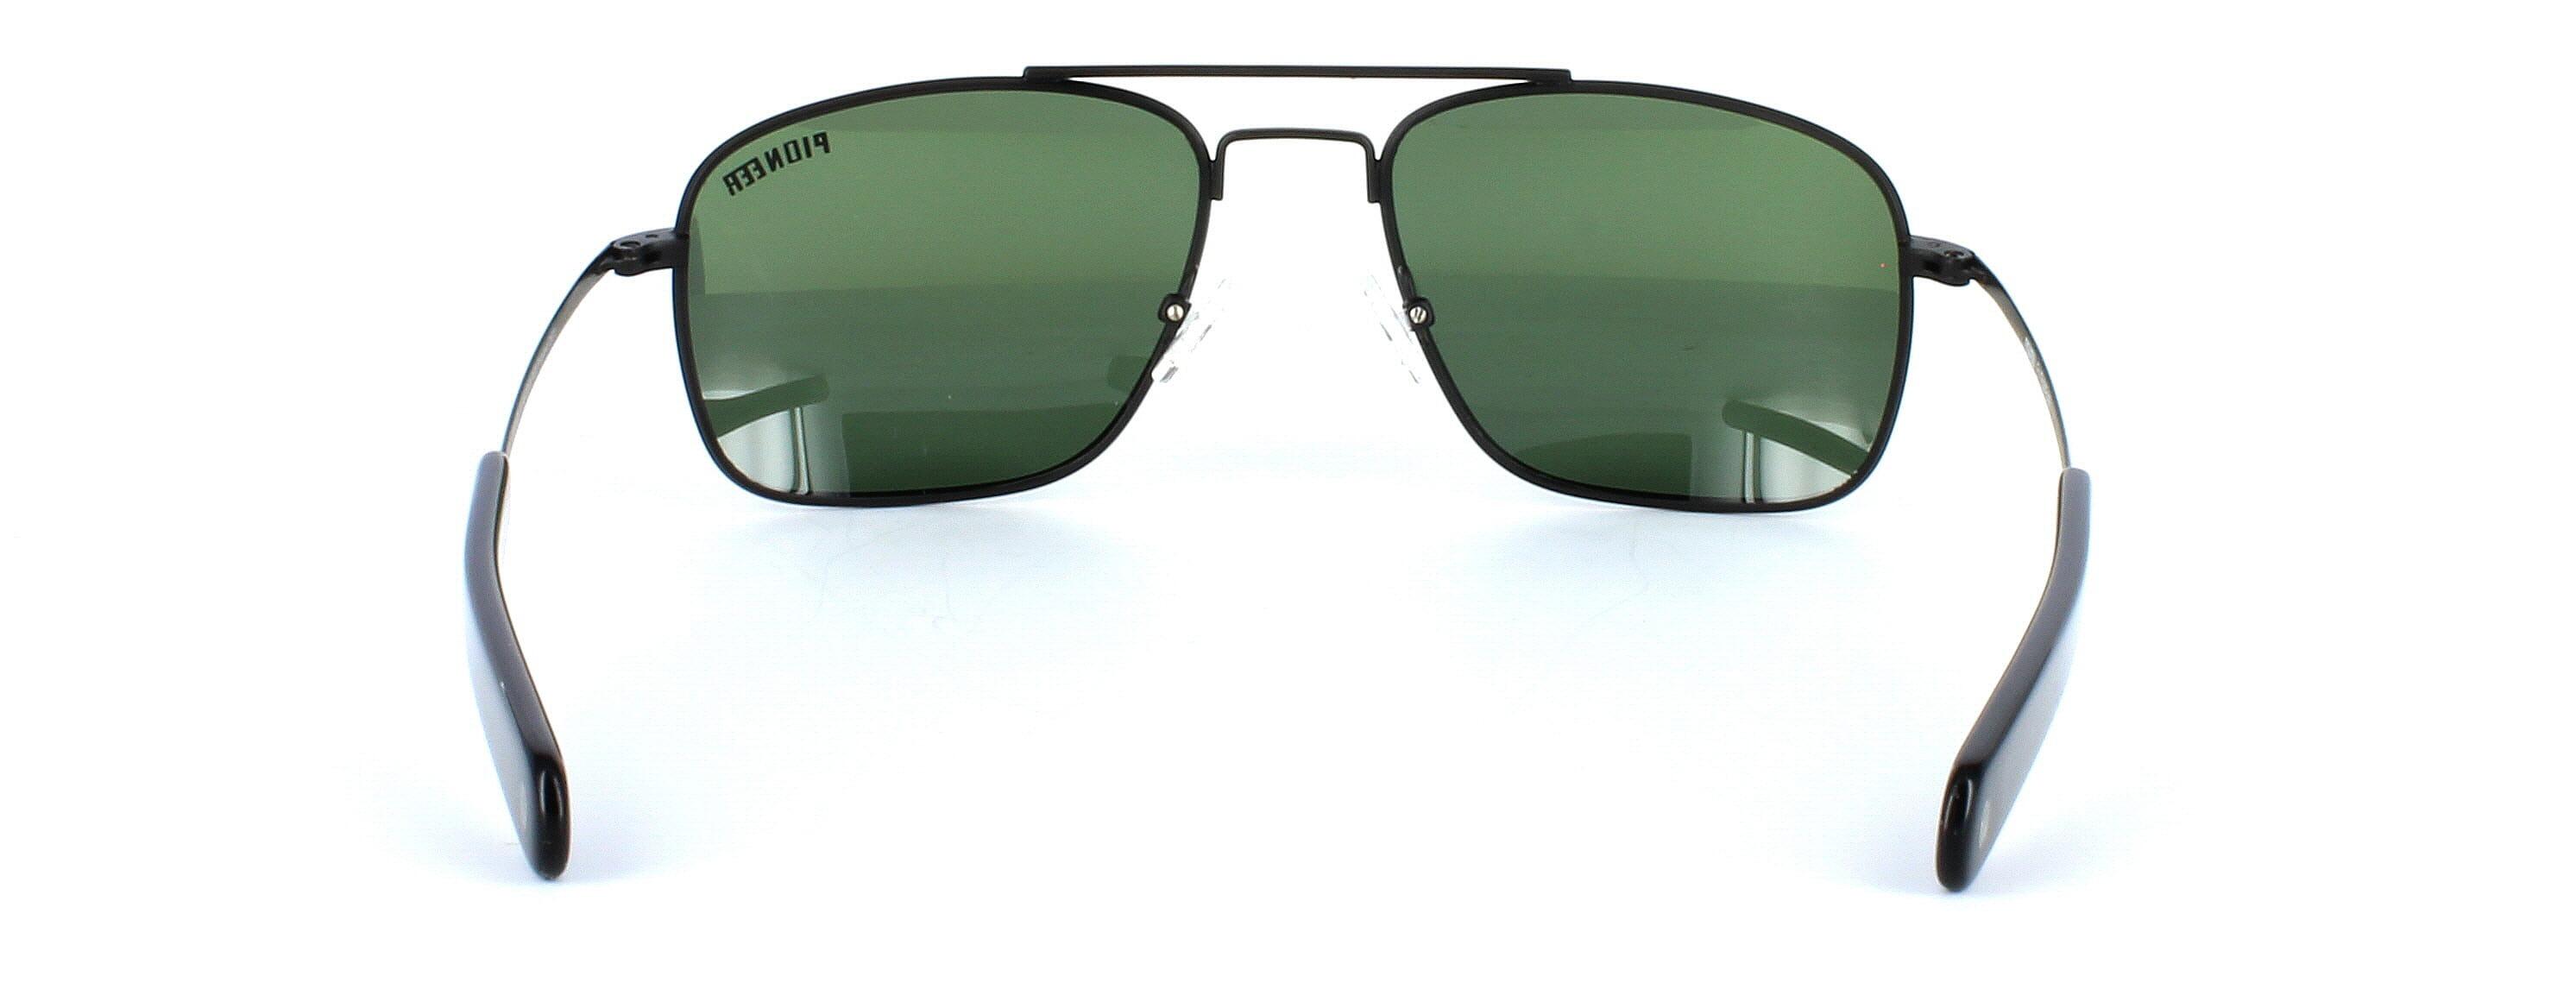 Tommaso - Gent's aviator style prescription sunglasses in black - choose green, brown or grey tints inc in the price - image view 3